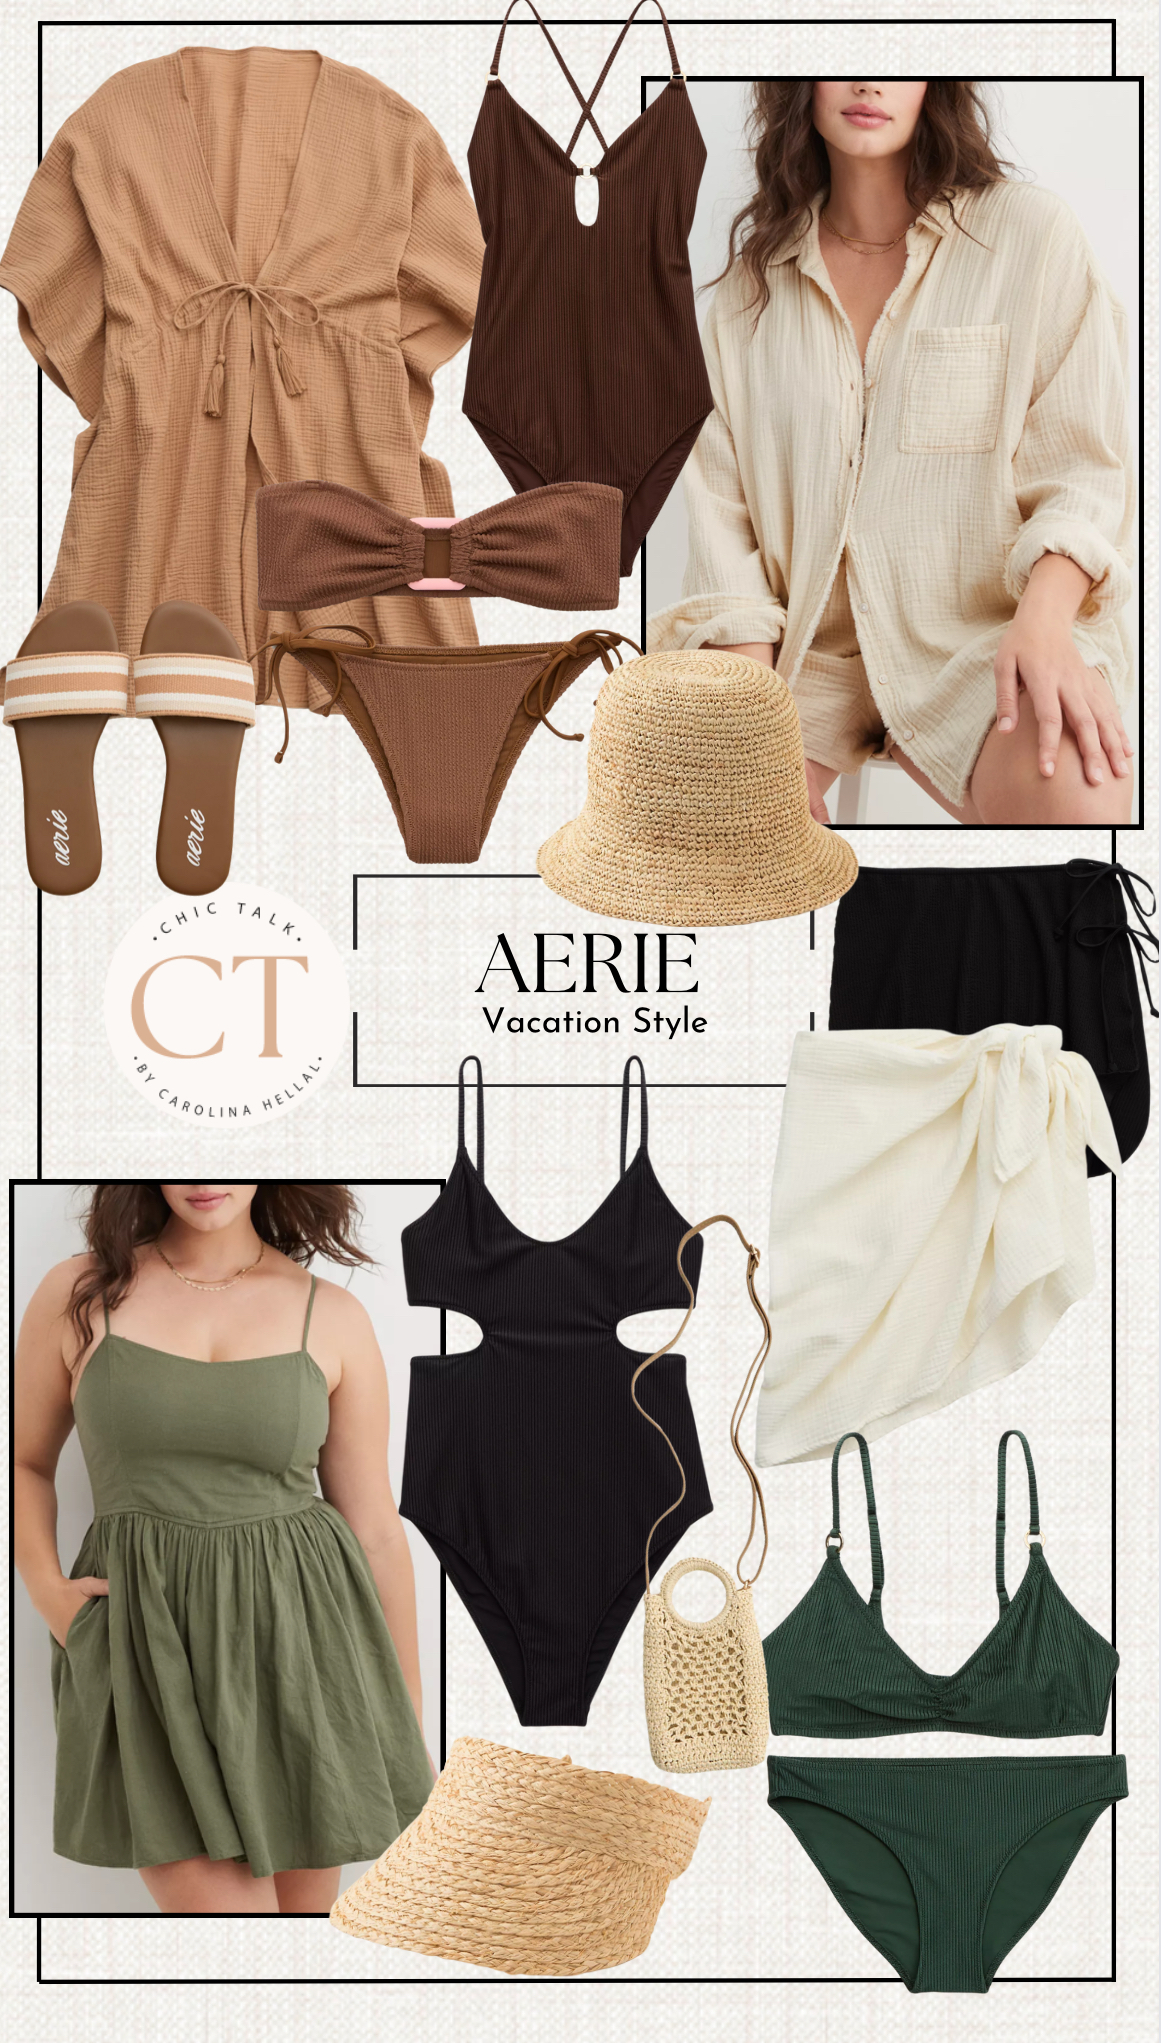 Vacation style via Aerie - CHIC TALK